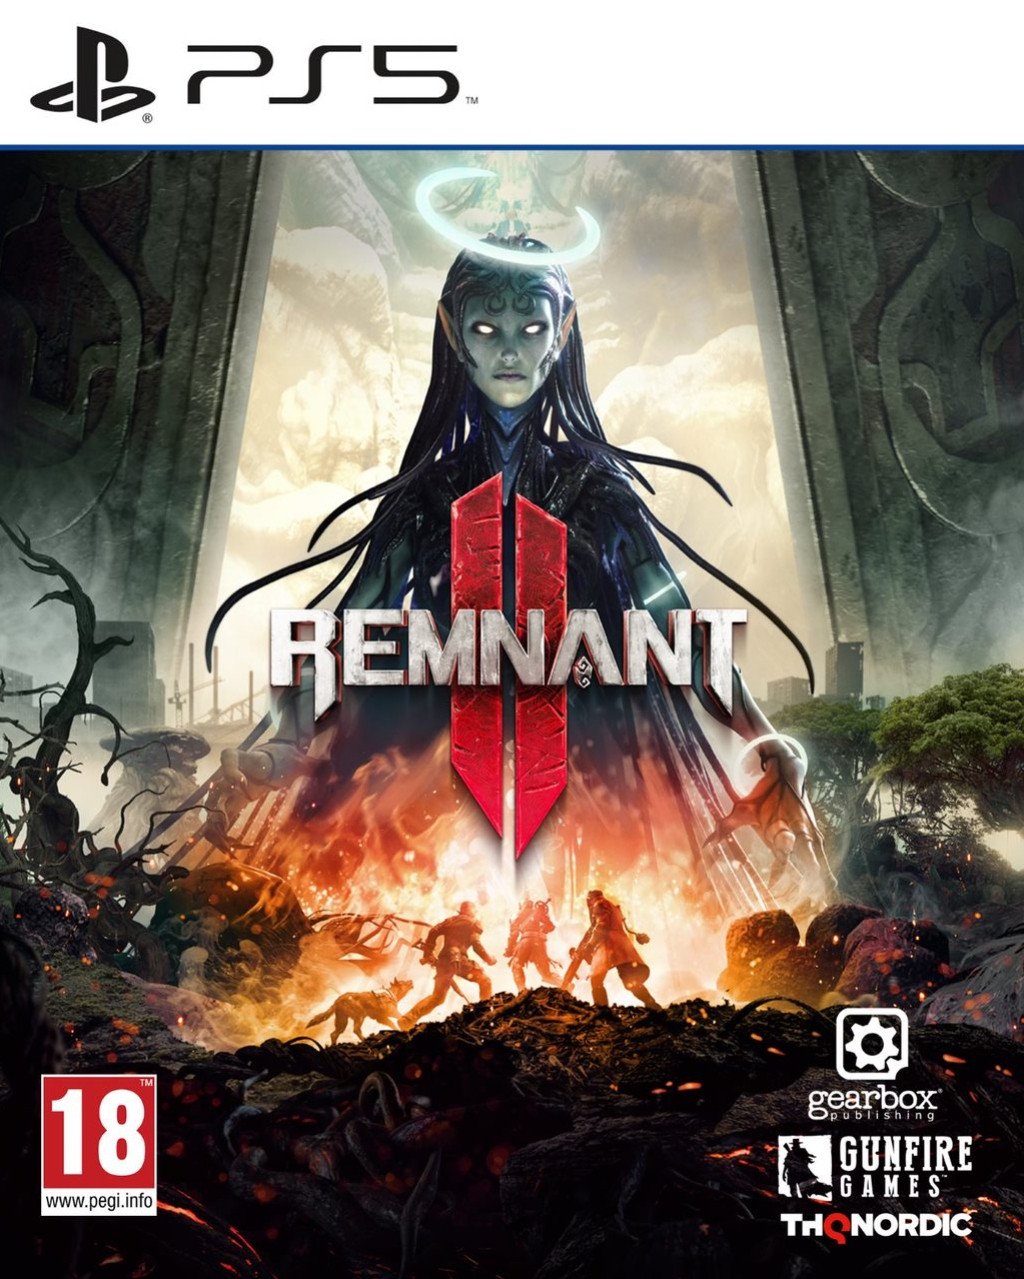 Remnant 2 (PS5), THQ Nordic